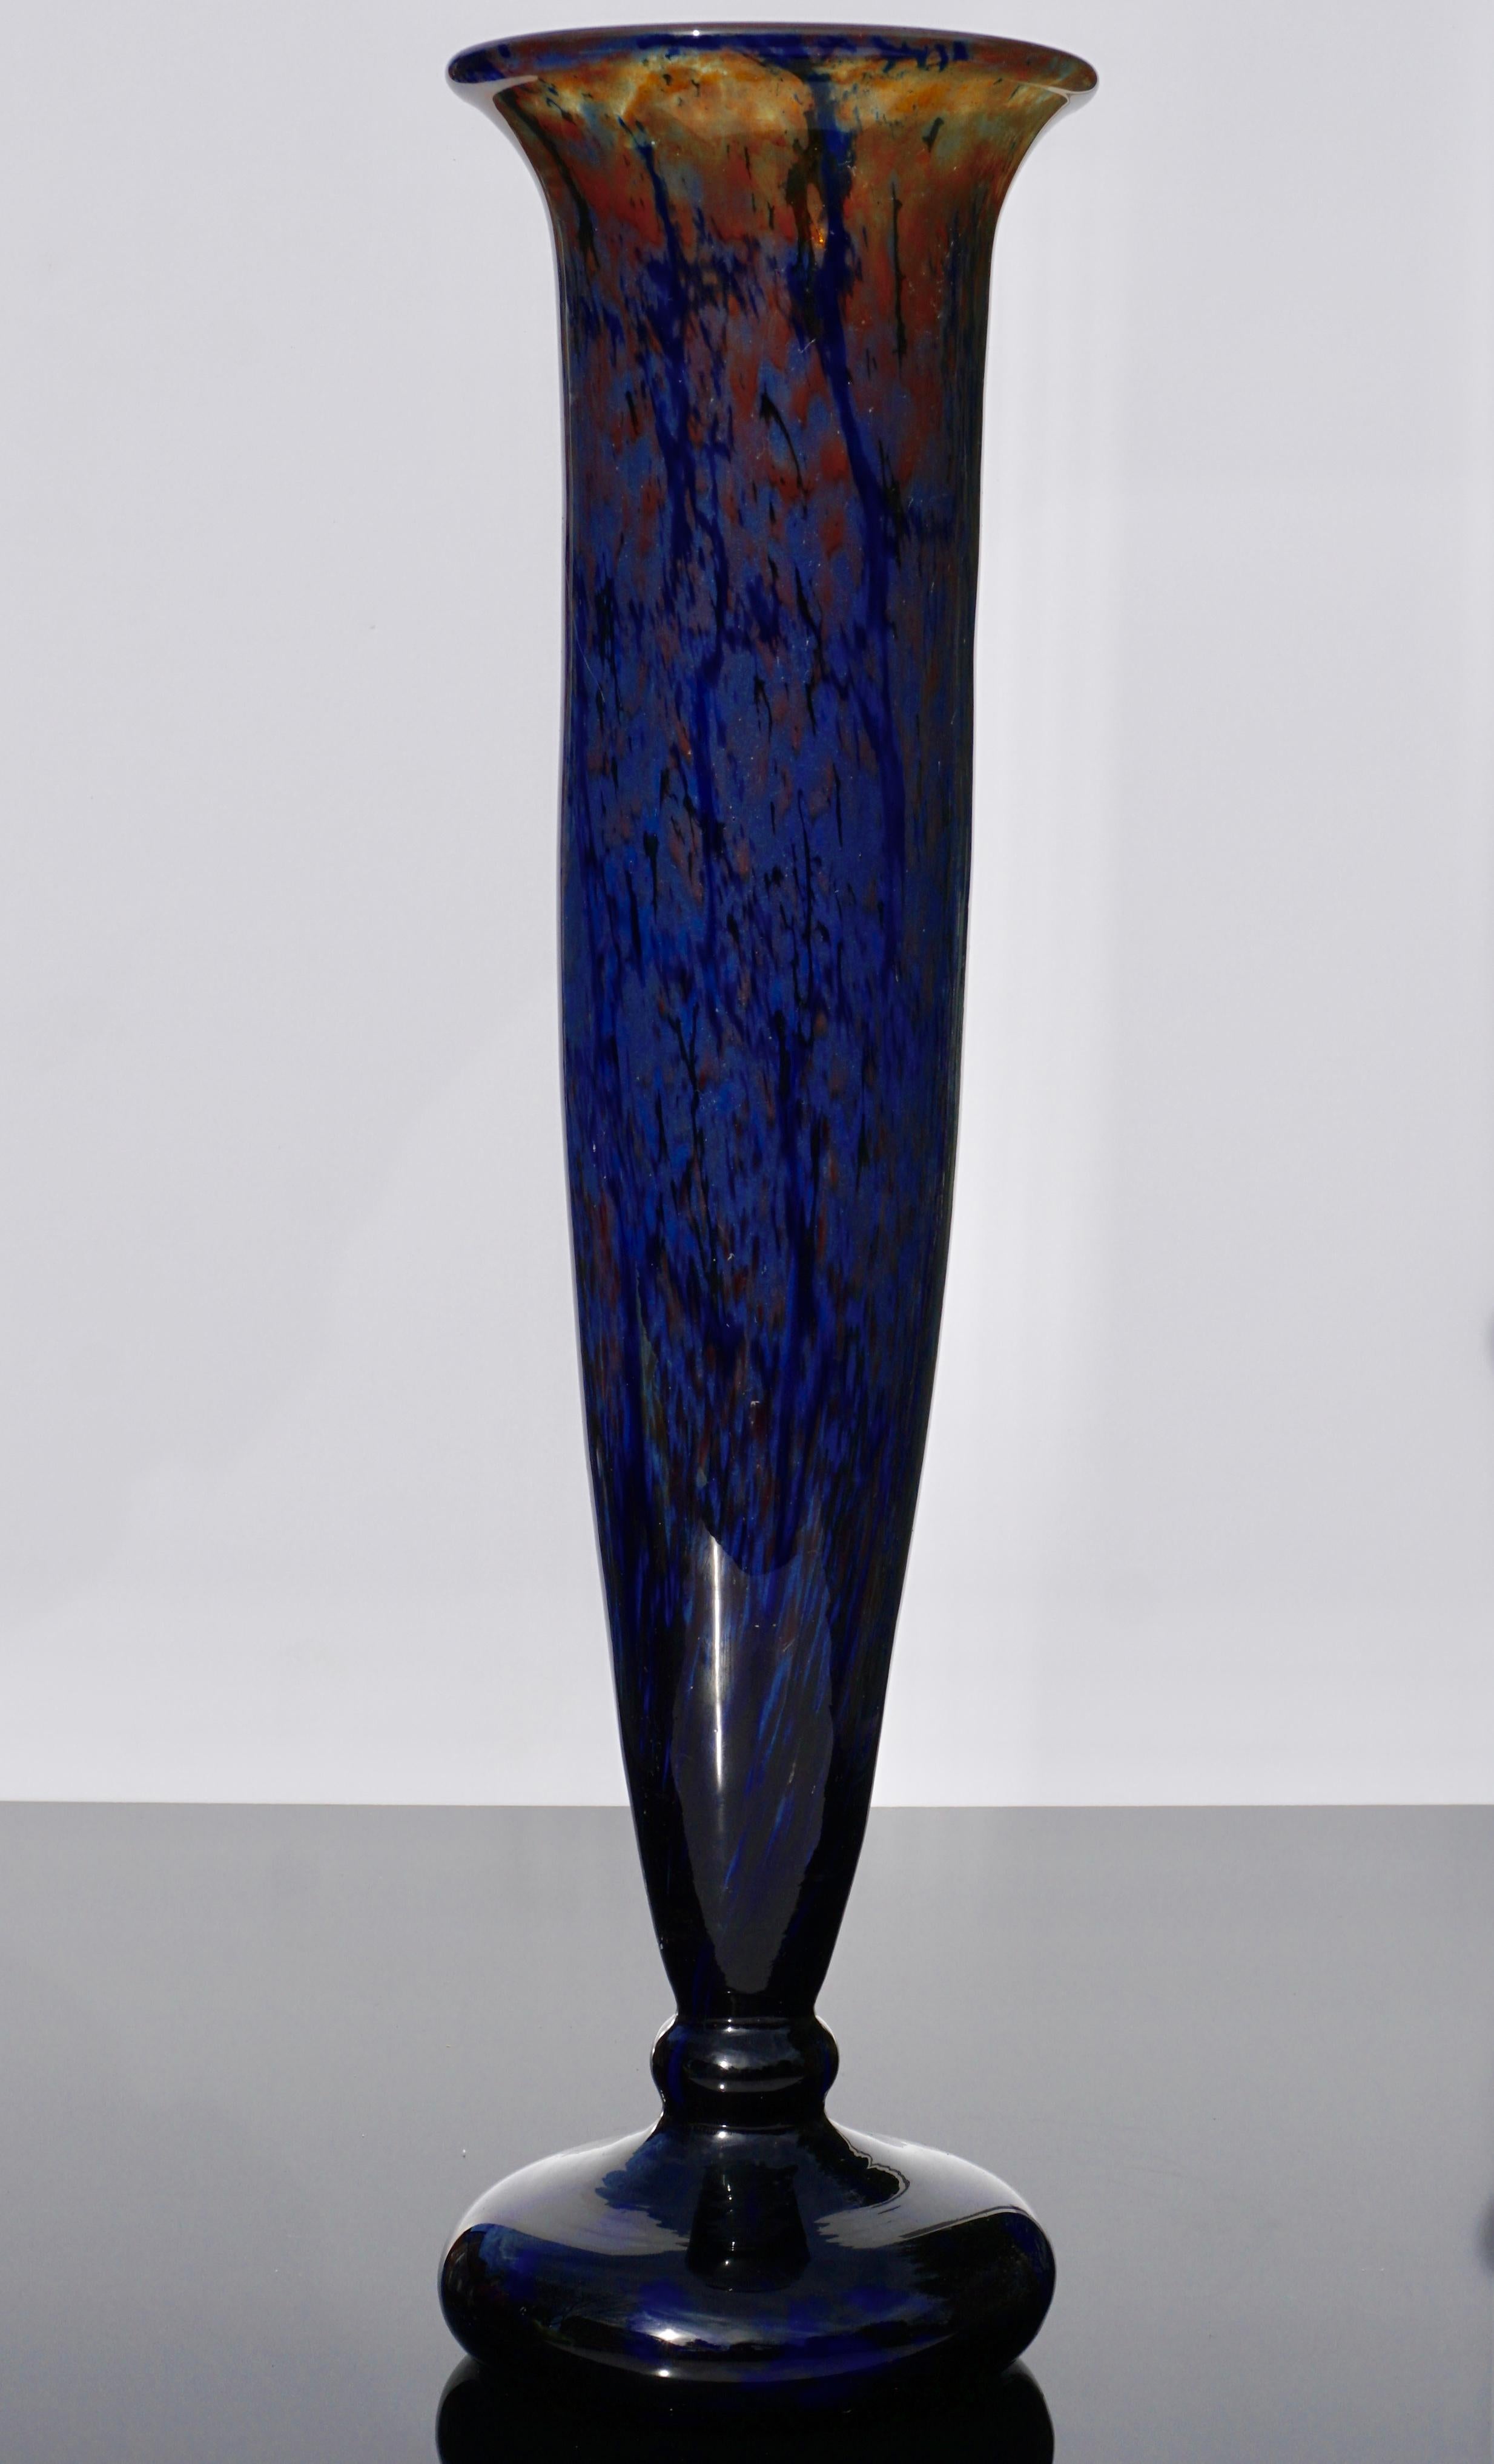 Schneider Glassworks (France, 1917-81)

A blue, orange and yellow variegated tall art glass vase perfect as a center piece on a dining table or side table. French Art Nouveau - Art Deco transition period, circa 1920.

Measures: Height 18.75